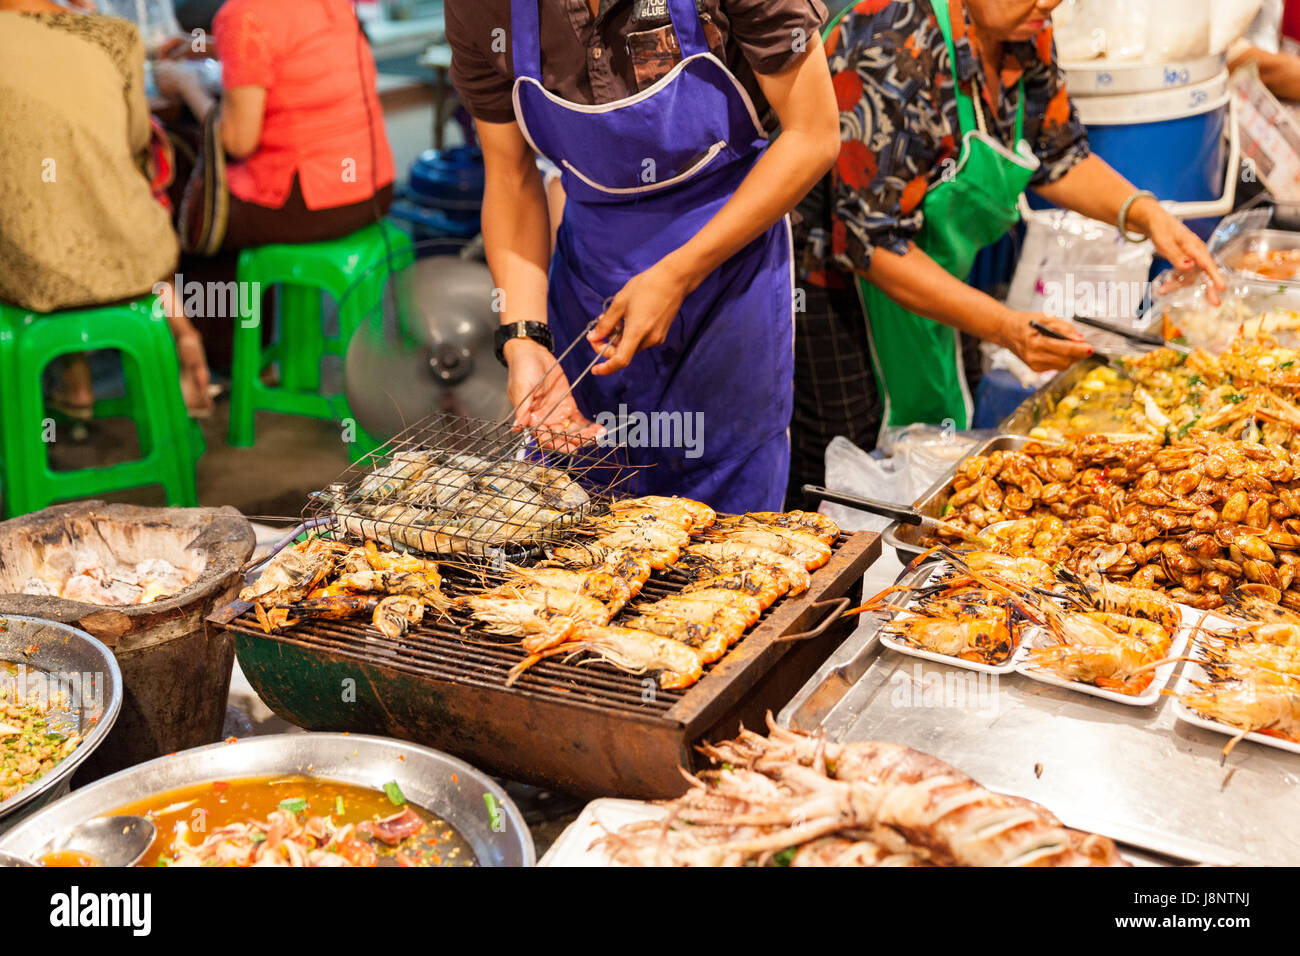 CHIANG MAI, THAILAND - AUGUST 27: Man cooks prawns on the grill at the Sunday Market (Walking Street) on August 27, 2016 in Chiang Mai, Thailand. Stock Photo